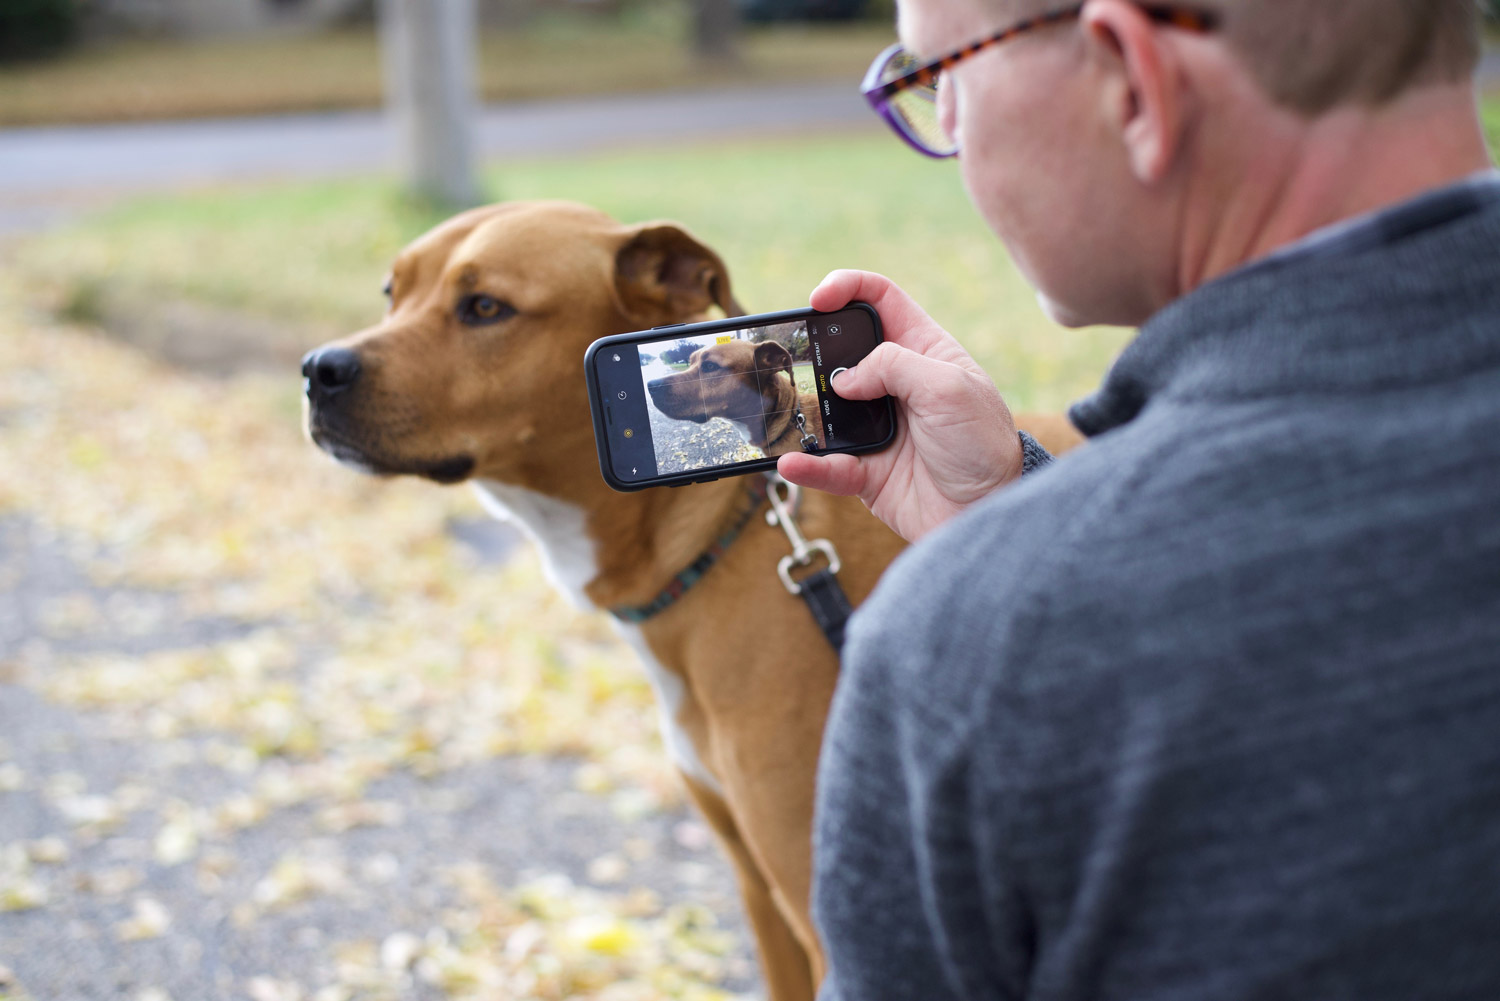 Away-home-and-pet-dog-cellphone